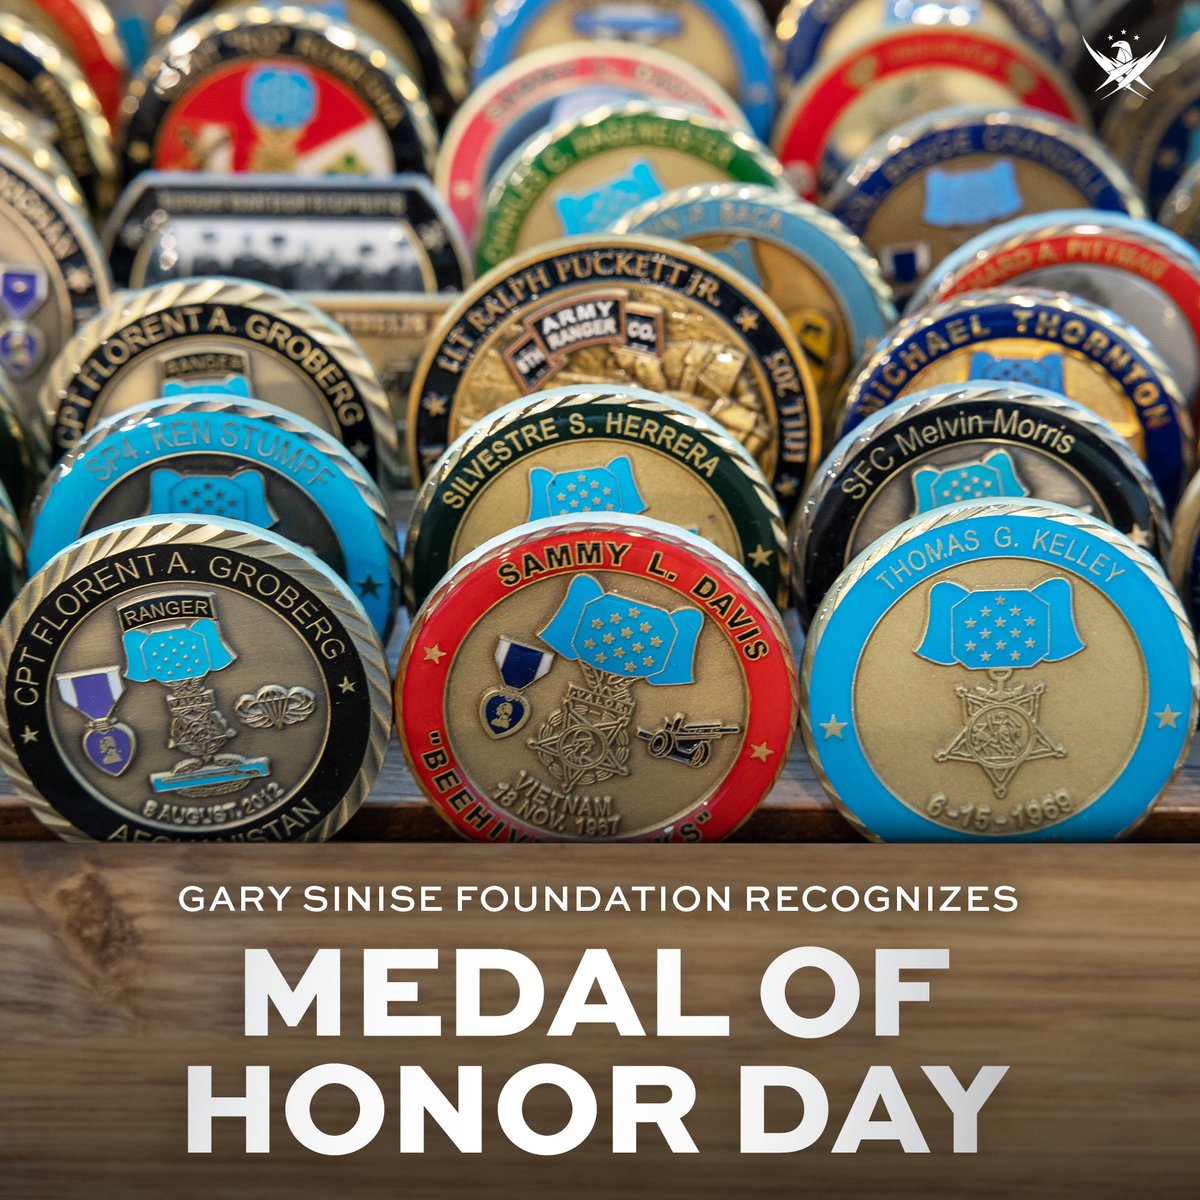 On National #MedalofHonorDay we honor those who have been awarded our nation's highest military decoration for acts of valor above and beyond the call of duty. Thank you, Medal of Honor Recipients, for going above the call of duty. We are forever grateful for you.